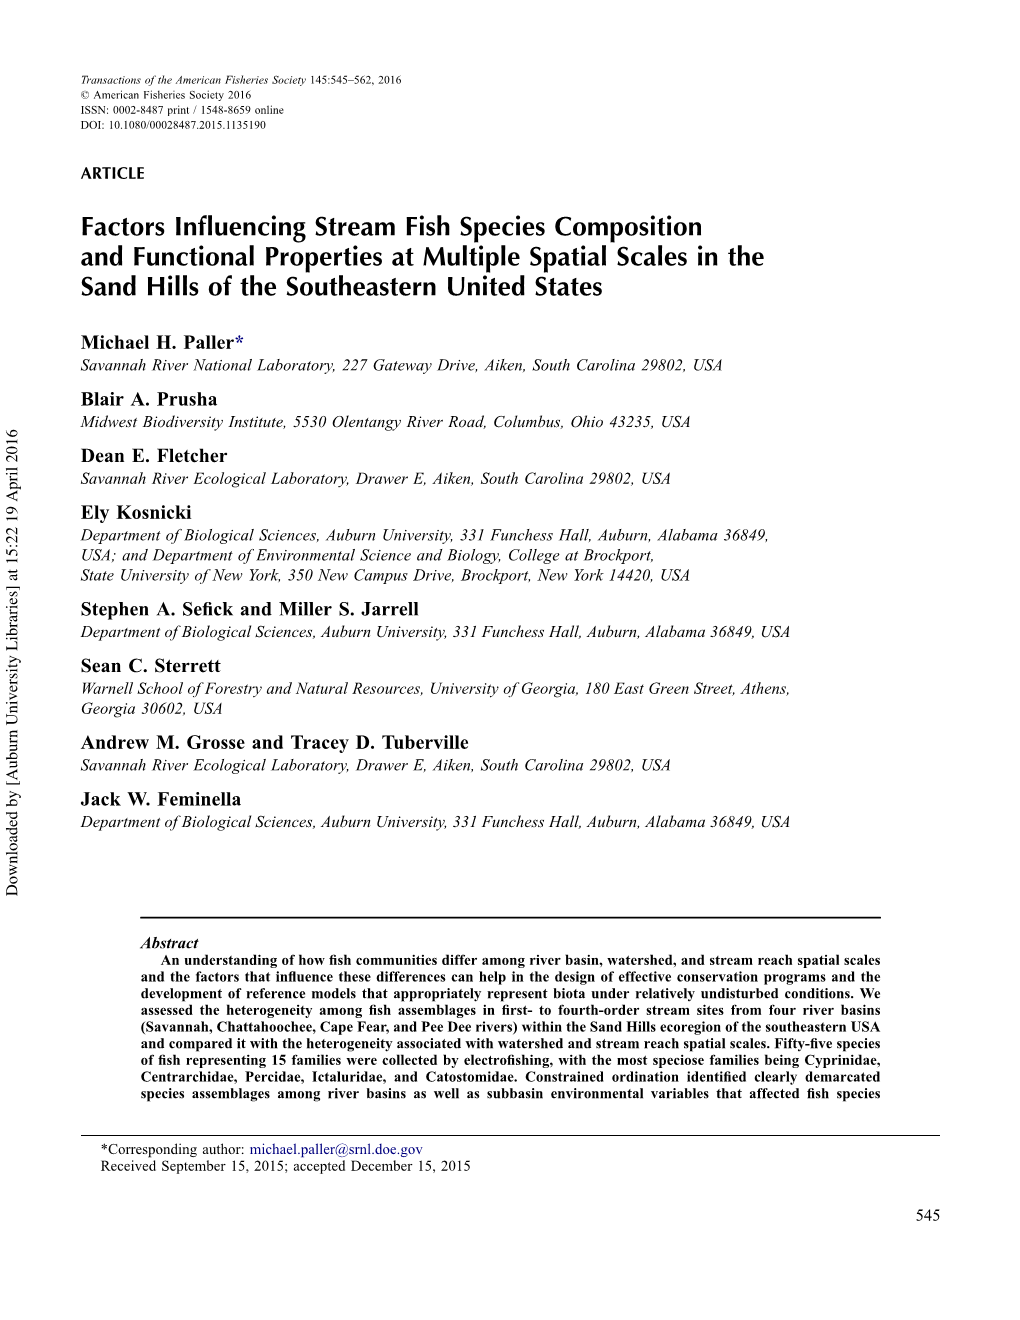 Factors Influencing Stream Fish Species Composition And